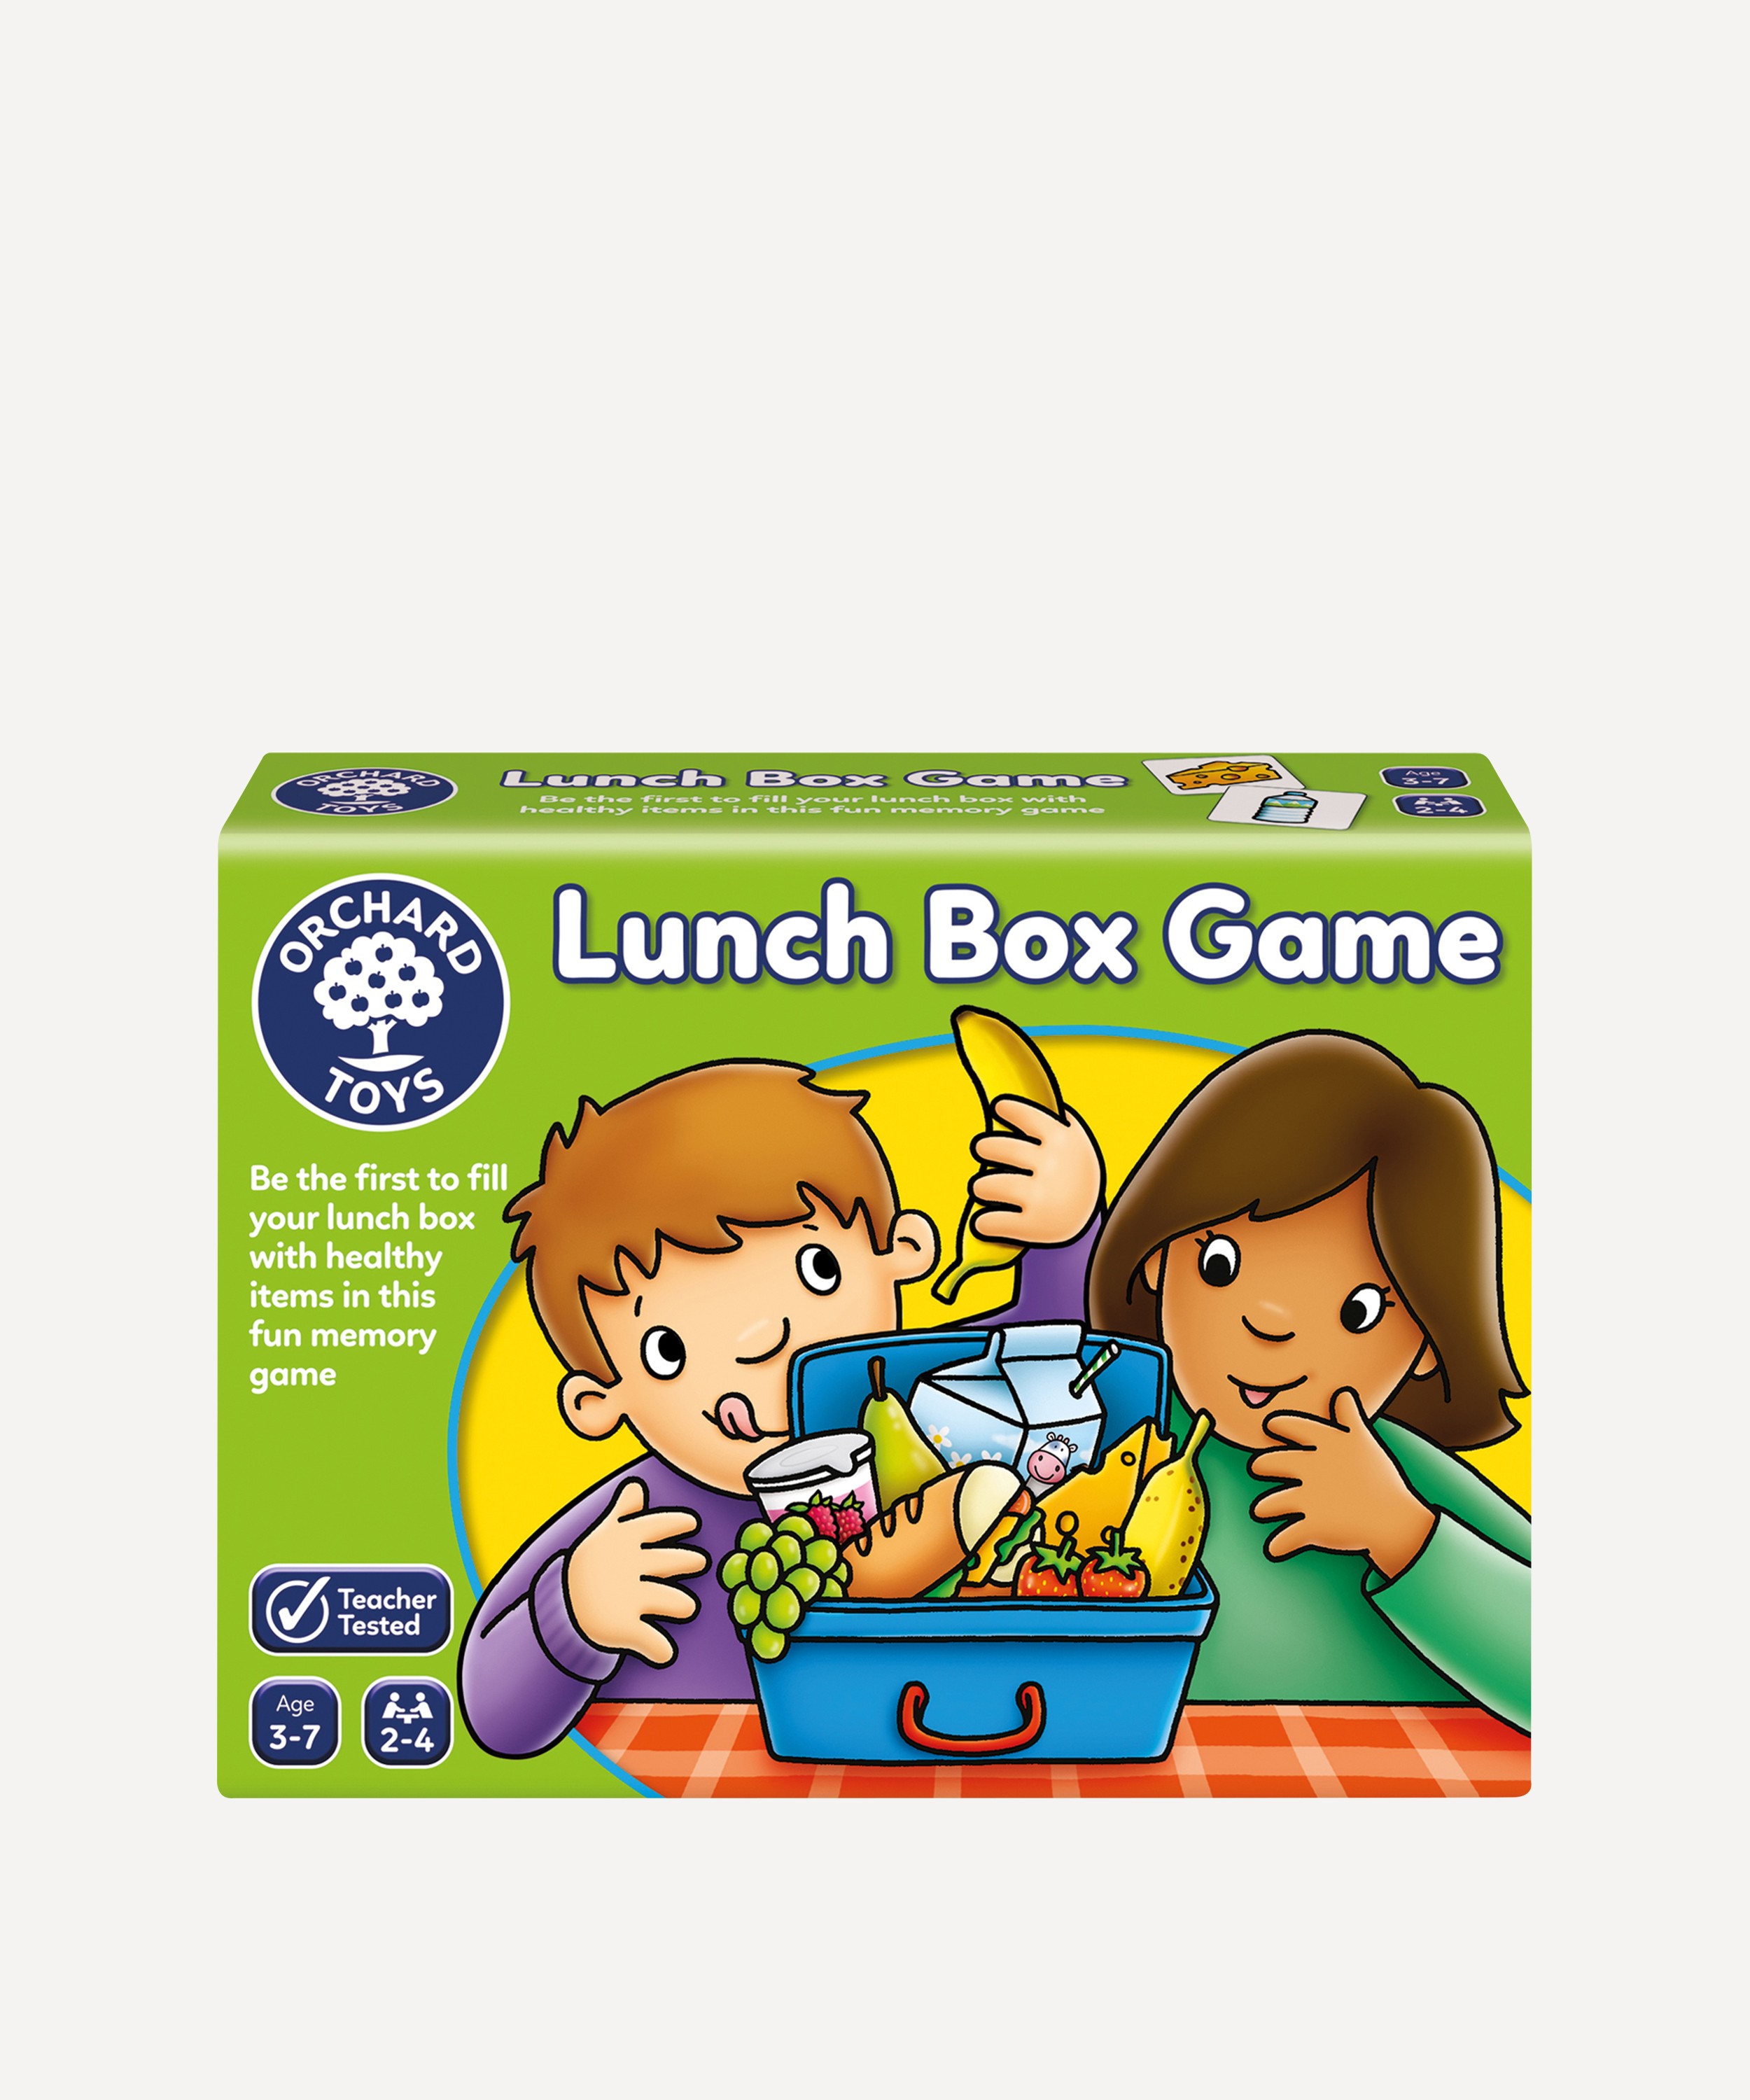 Playing the Lunchbox Game from Orchard Toys 